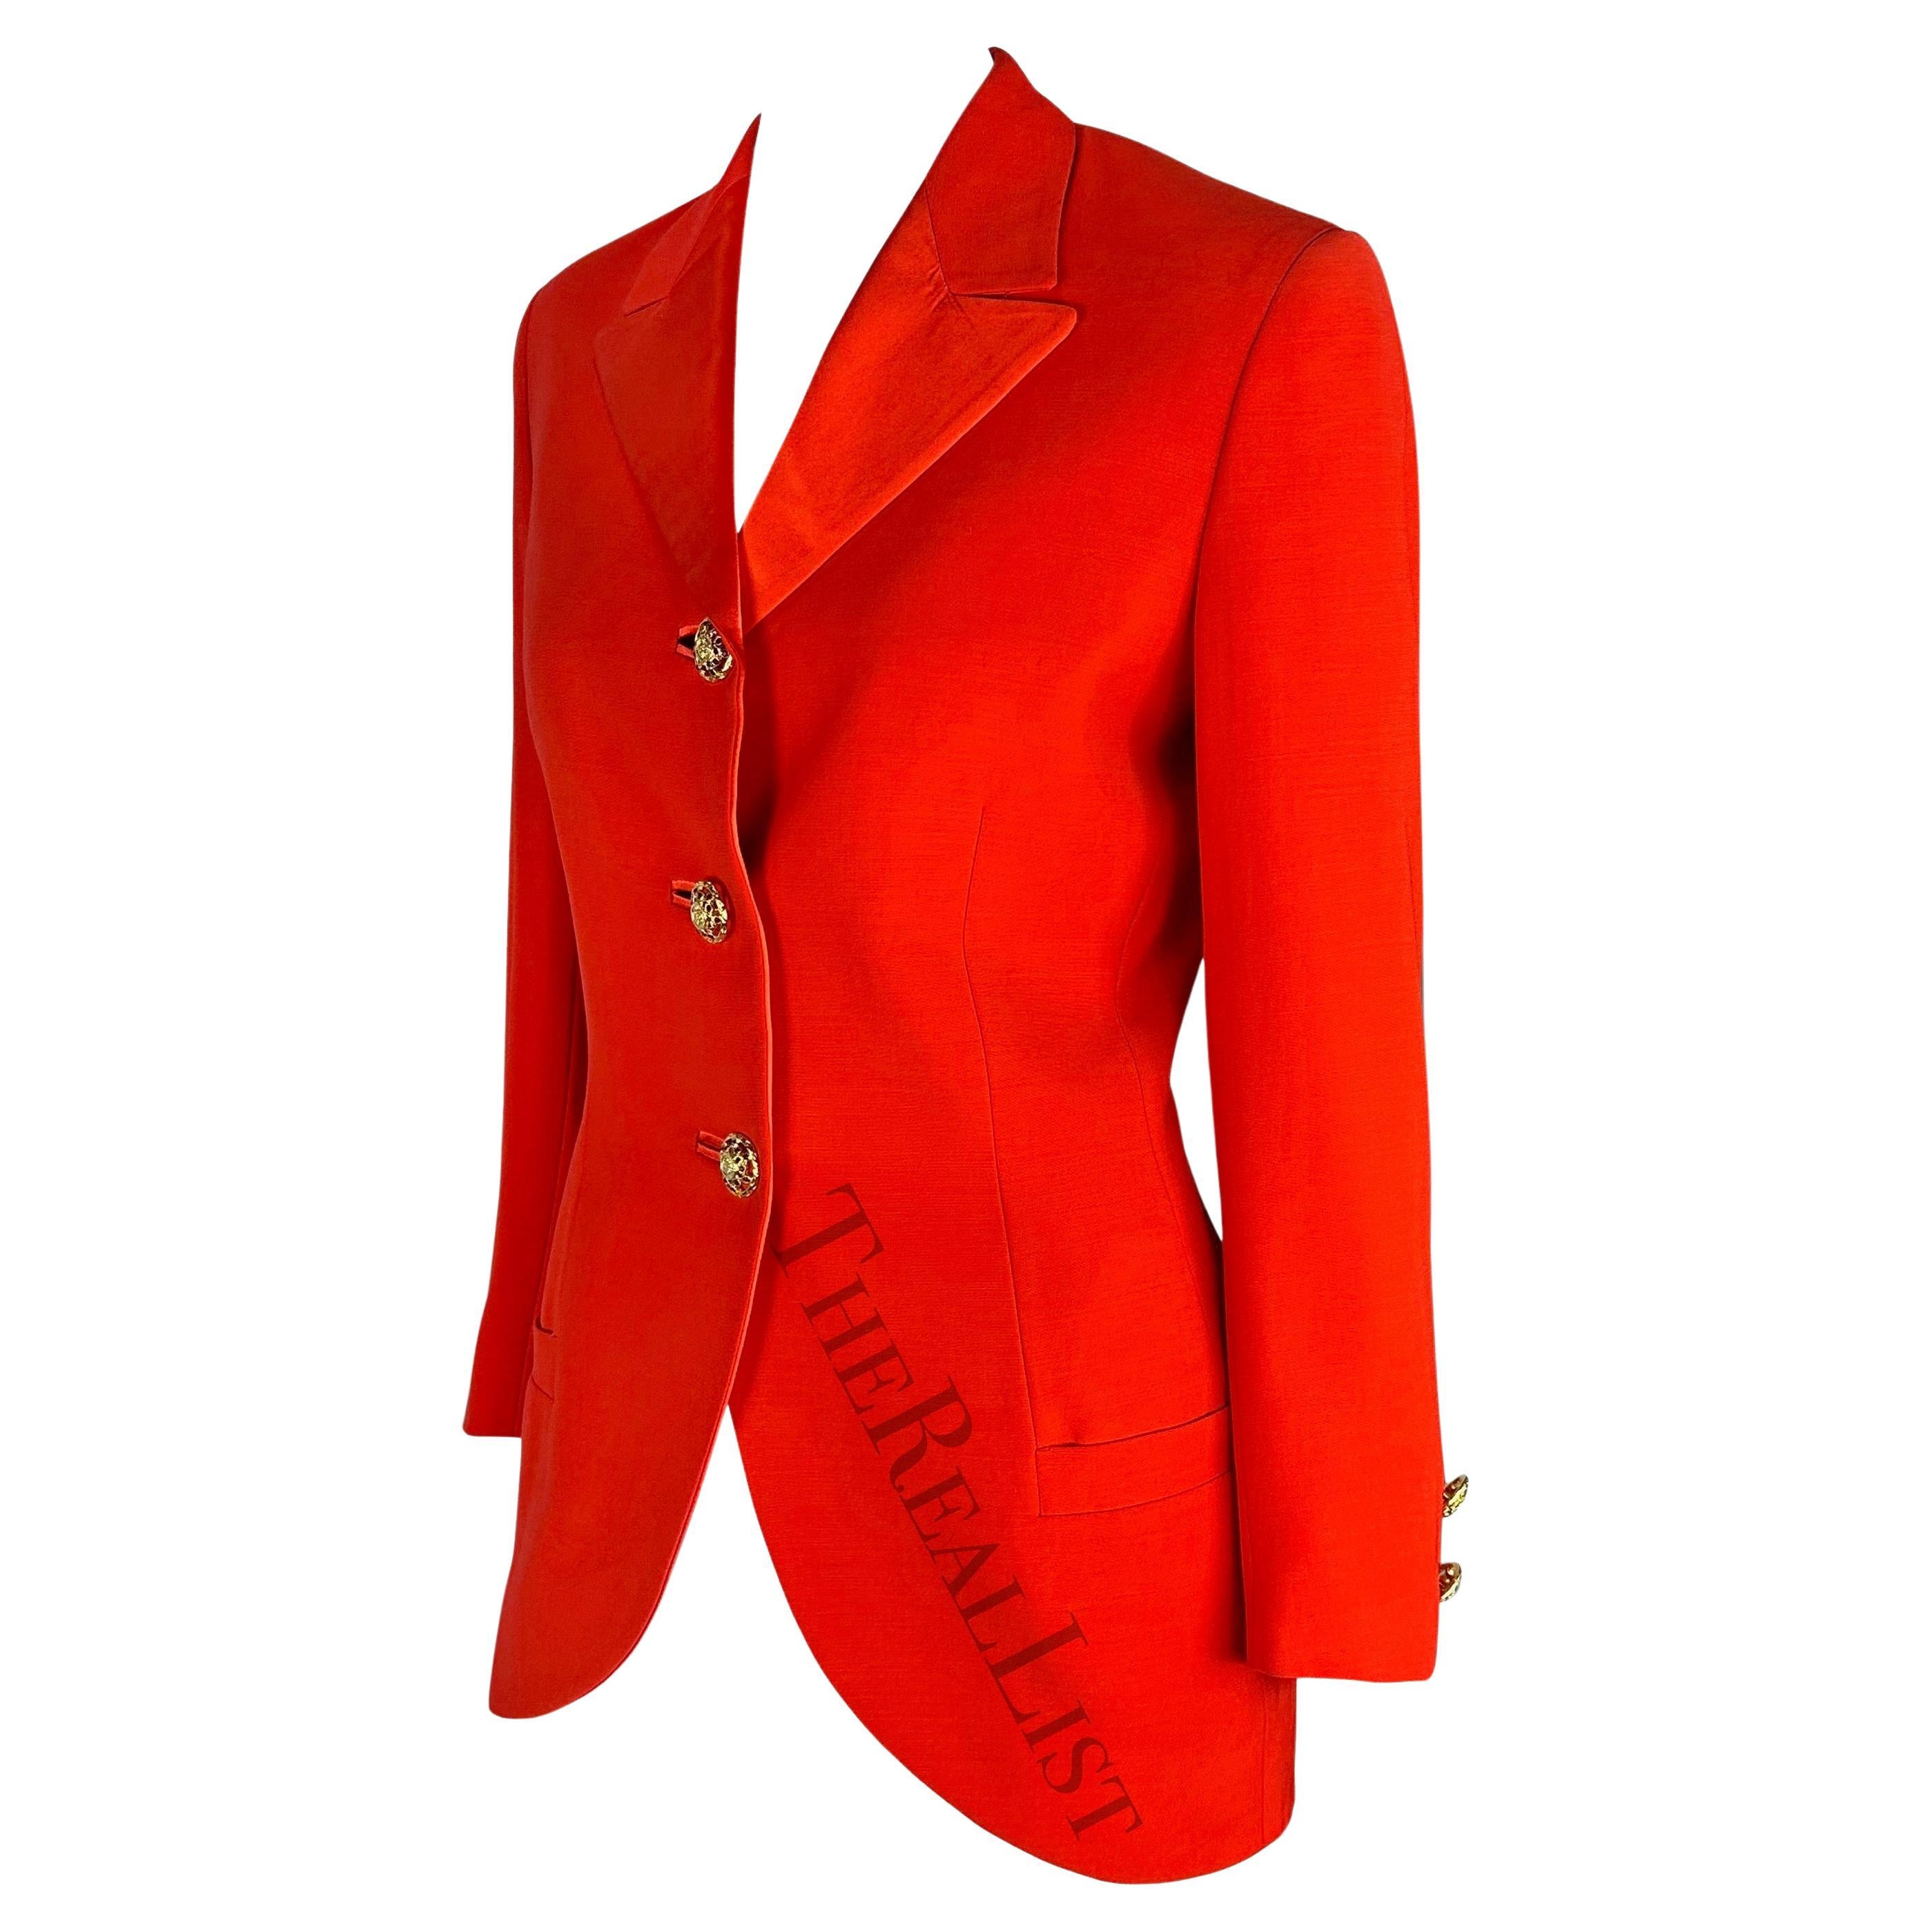 F/W 1992 Gianni Versace Couture Bondage (Miss S&M) Runway Collection Red Blazer For Sale 3